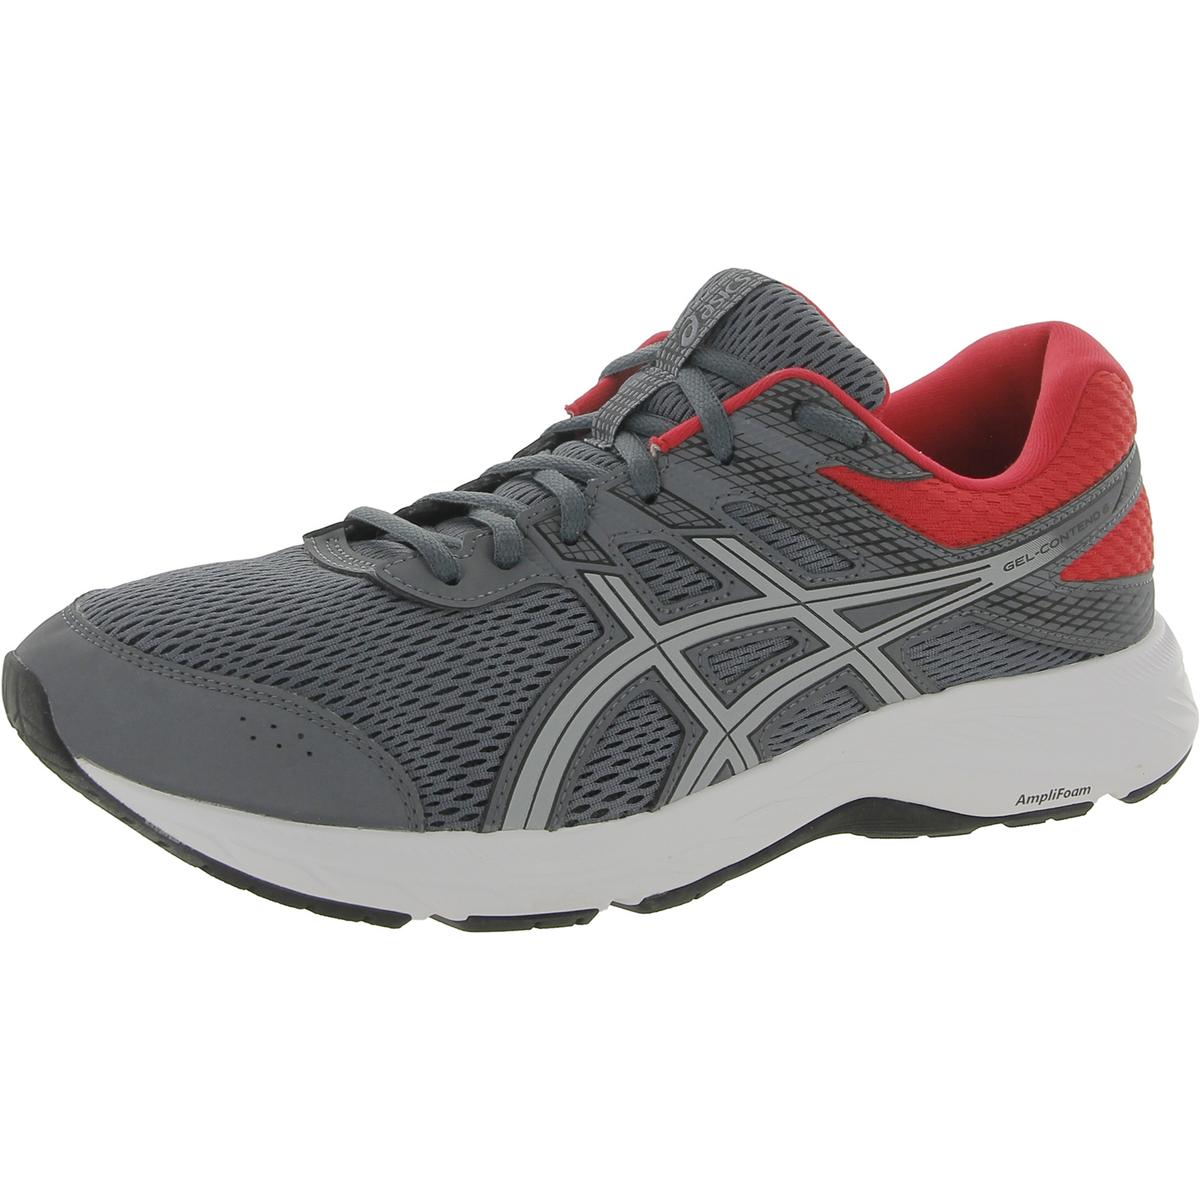 Asics Mens Contend 6 Trainers Gym Comfort Running Shoes Sneakers BHFO ...